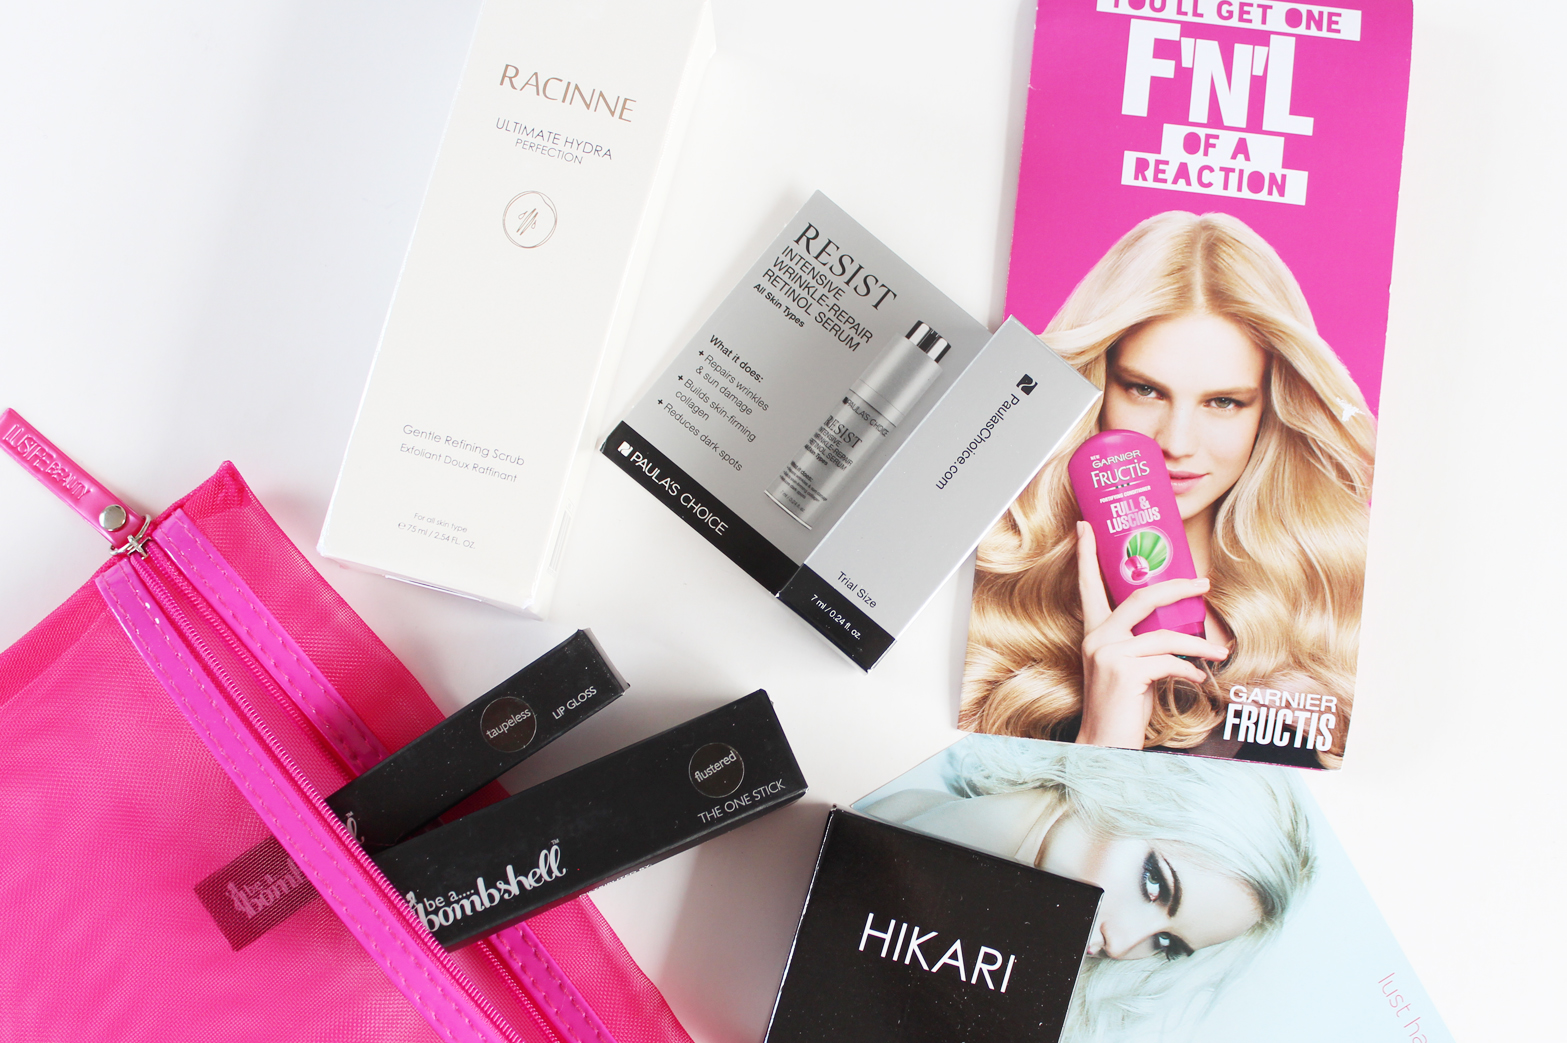 LUST HAVE IT | Women's Beauty Box June + July '15 - Unboxing + Initial Thoughts - CassandraMyee